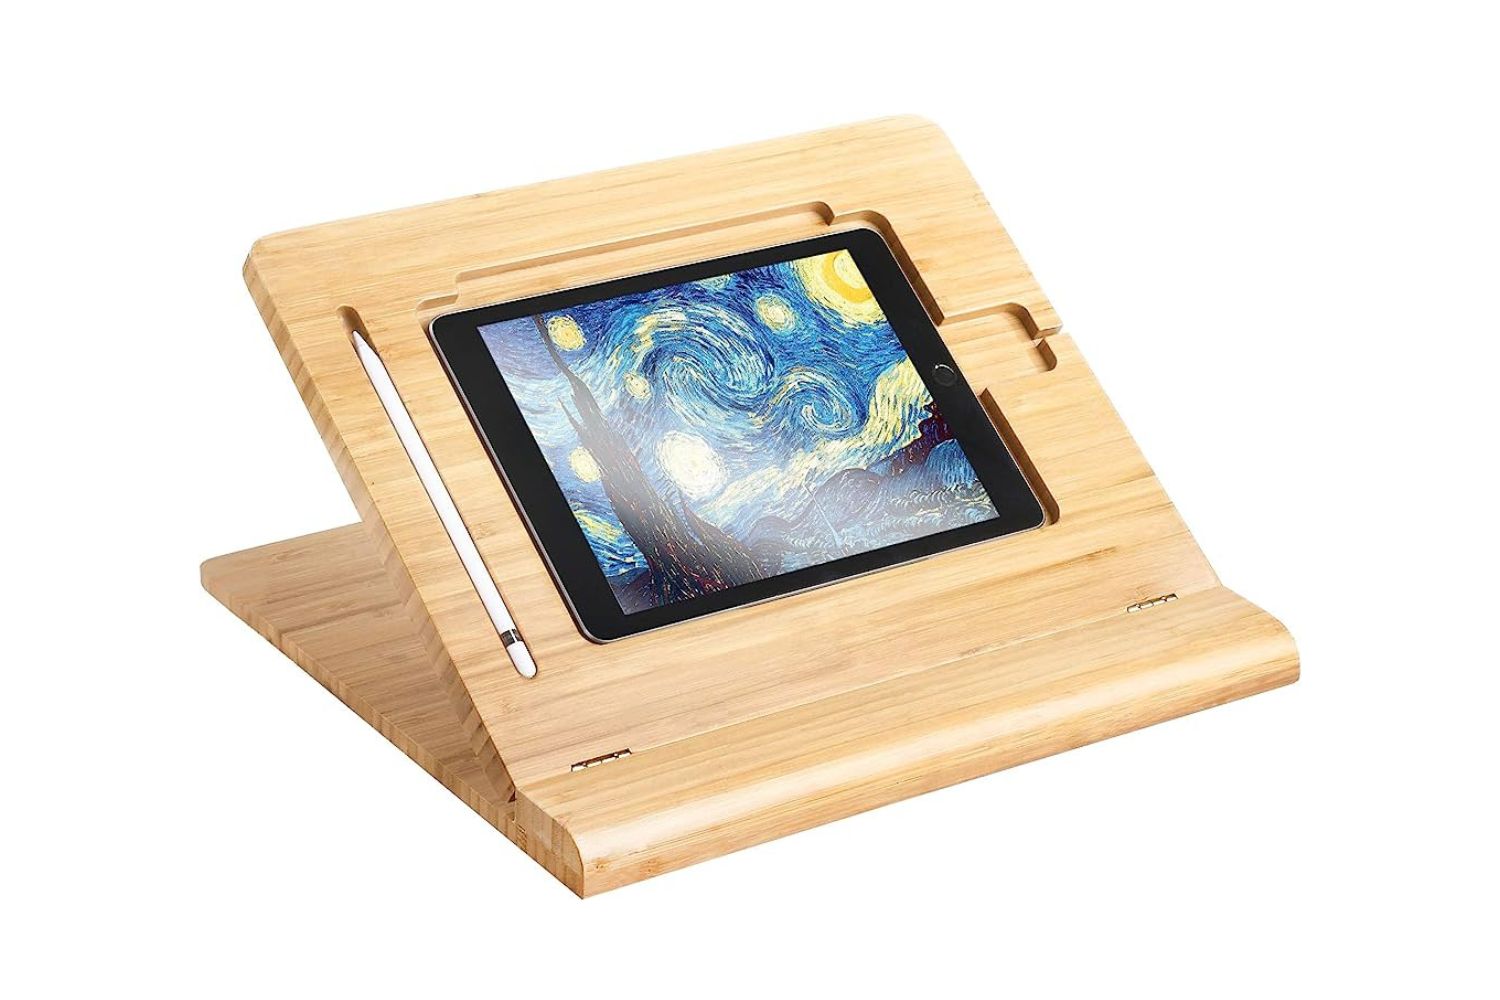 How To Make A Tablet Stand Out Of Wood